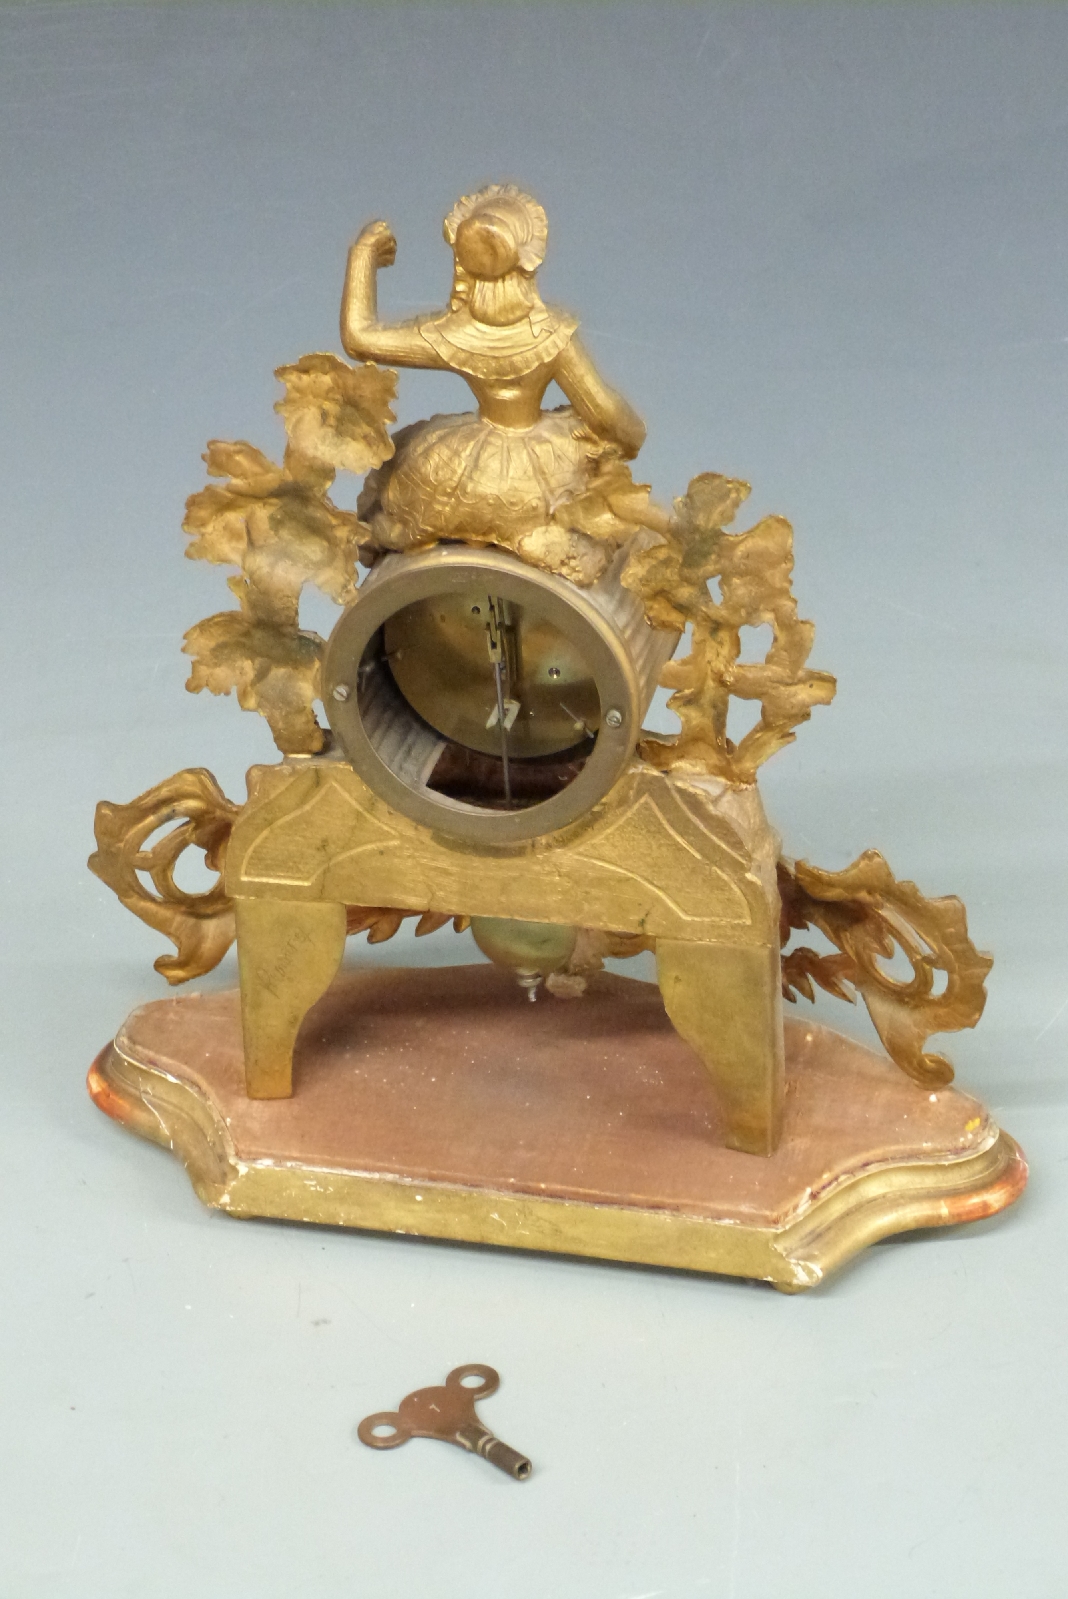 19thC French figural mantel clock, the Roman enamel dial with Breguet hands, the single train - Image 3 of 3